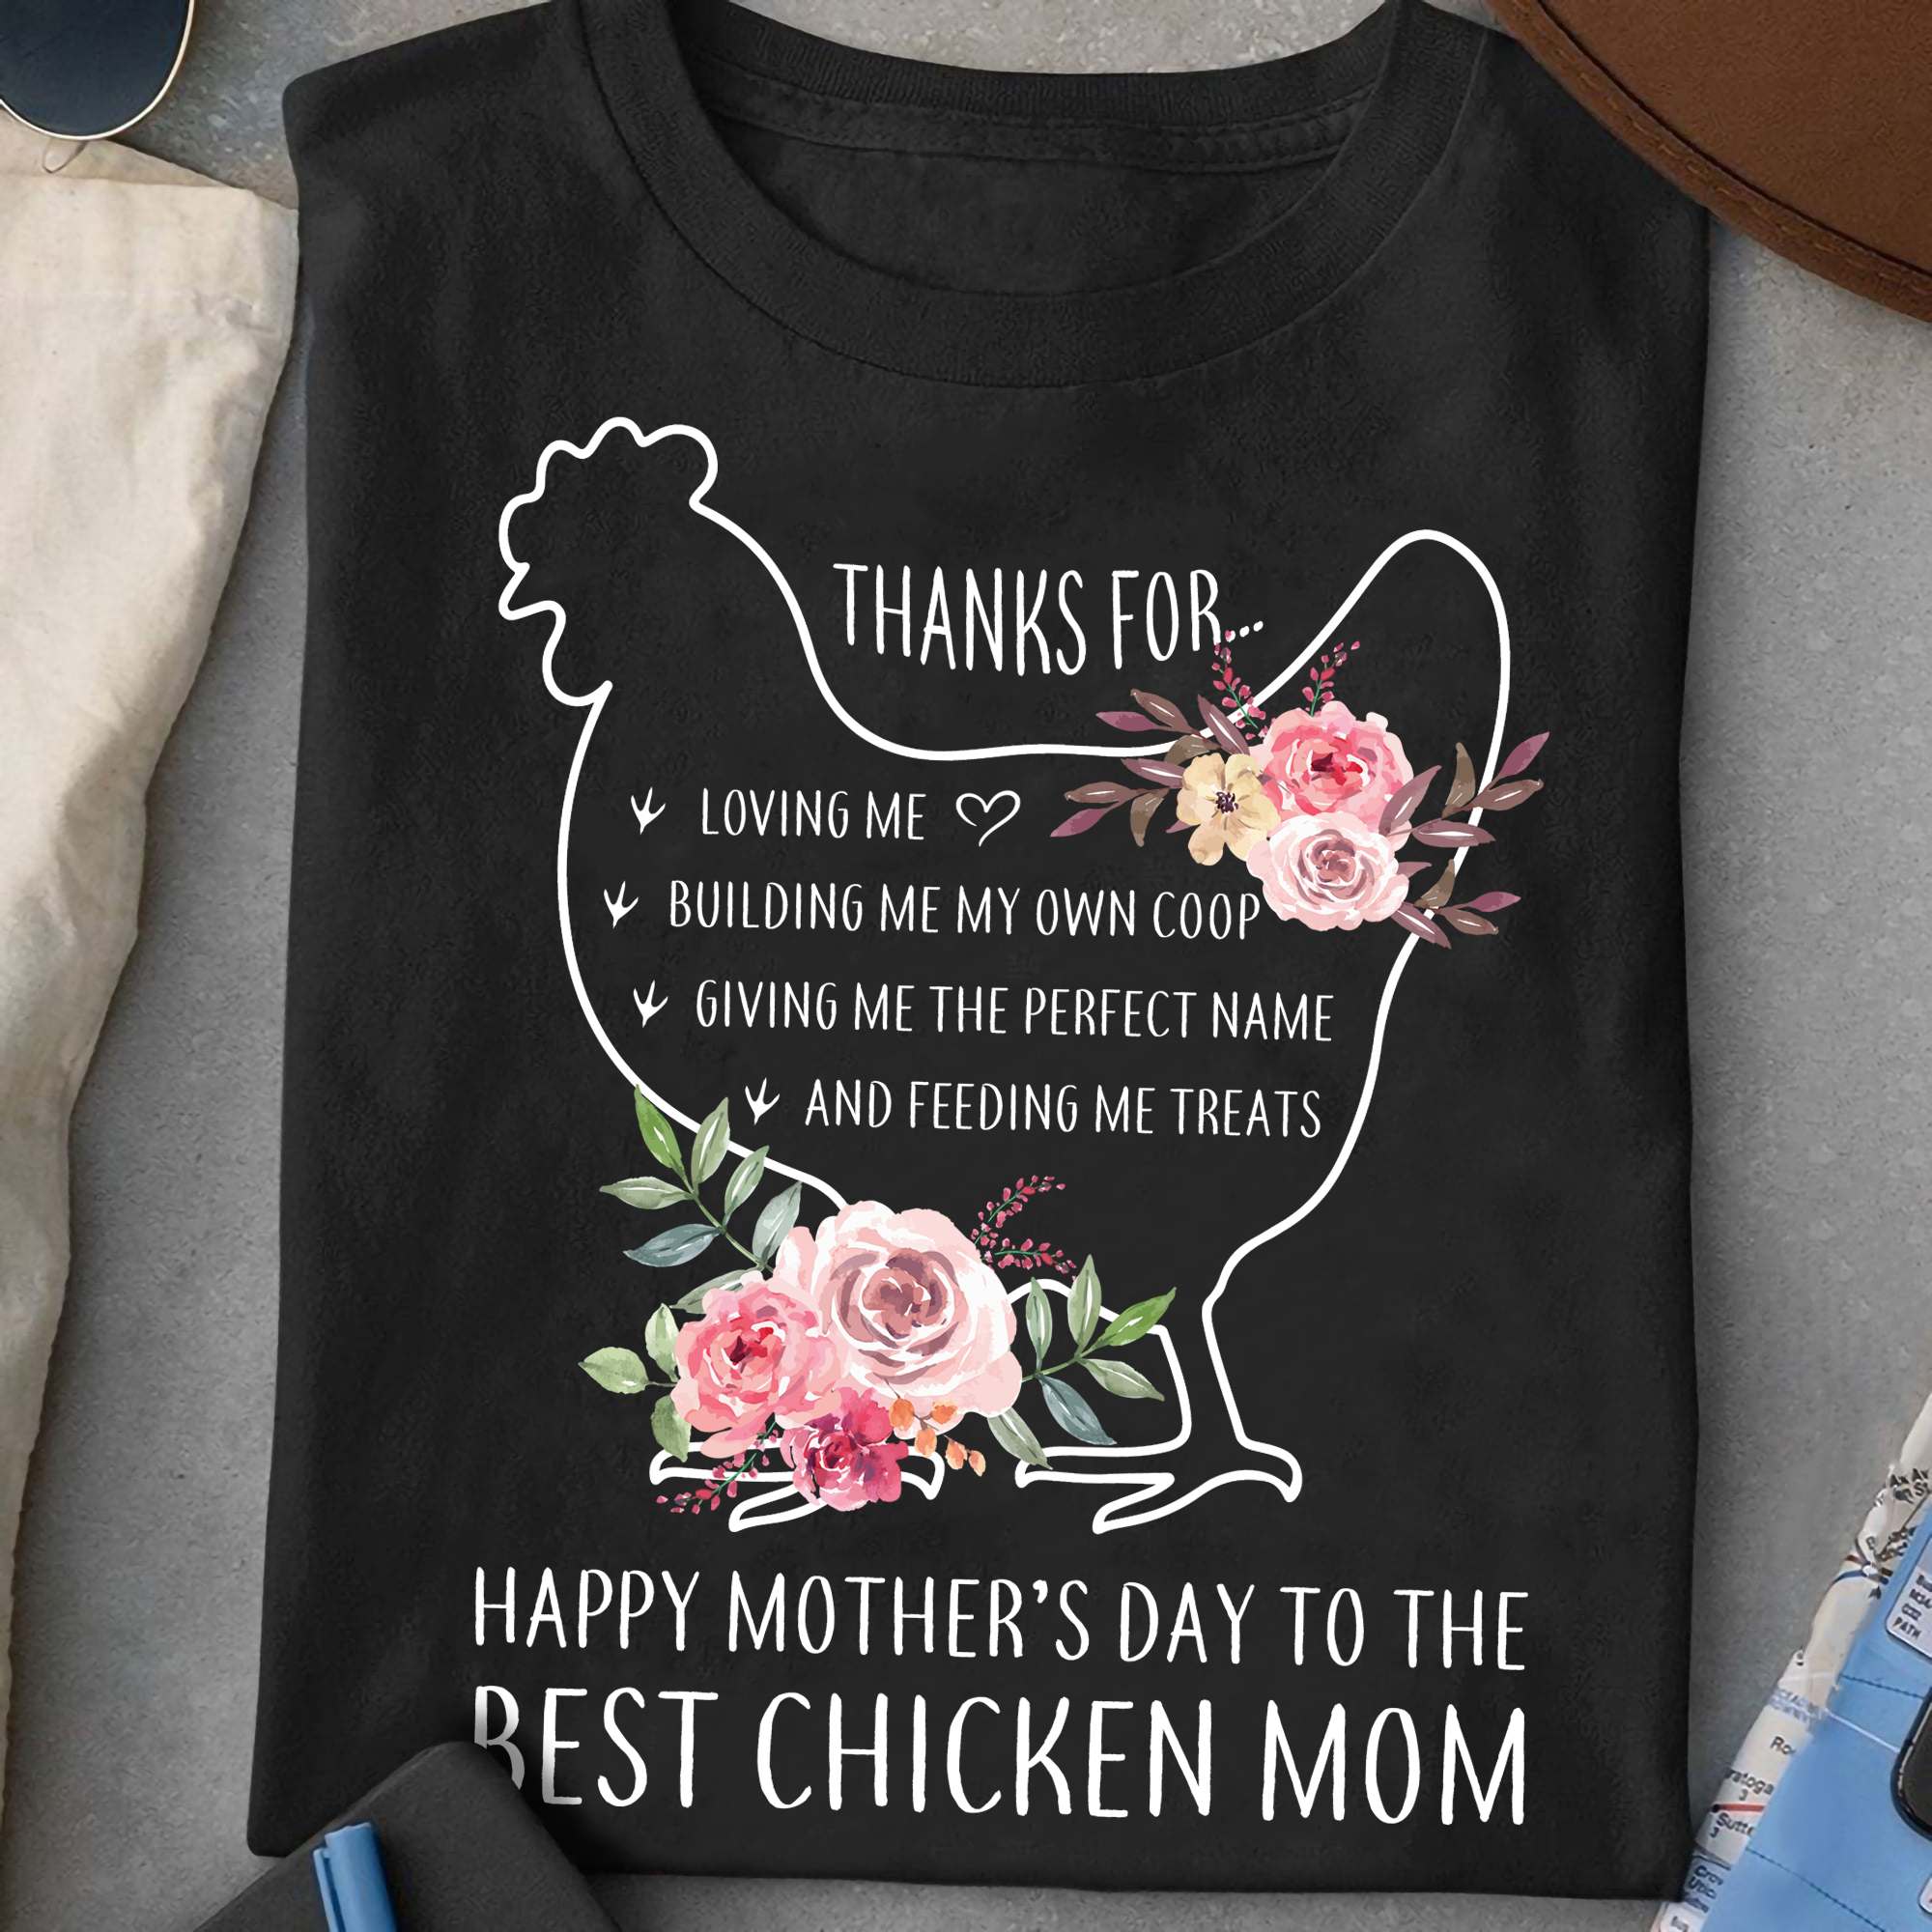 Chicken Mom - Thanks for loving me building me my own coop Happy mother's day to the best chicken mom